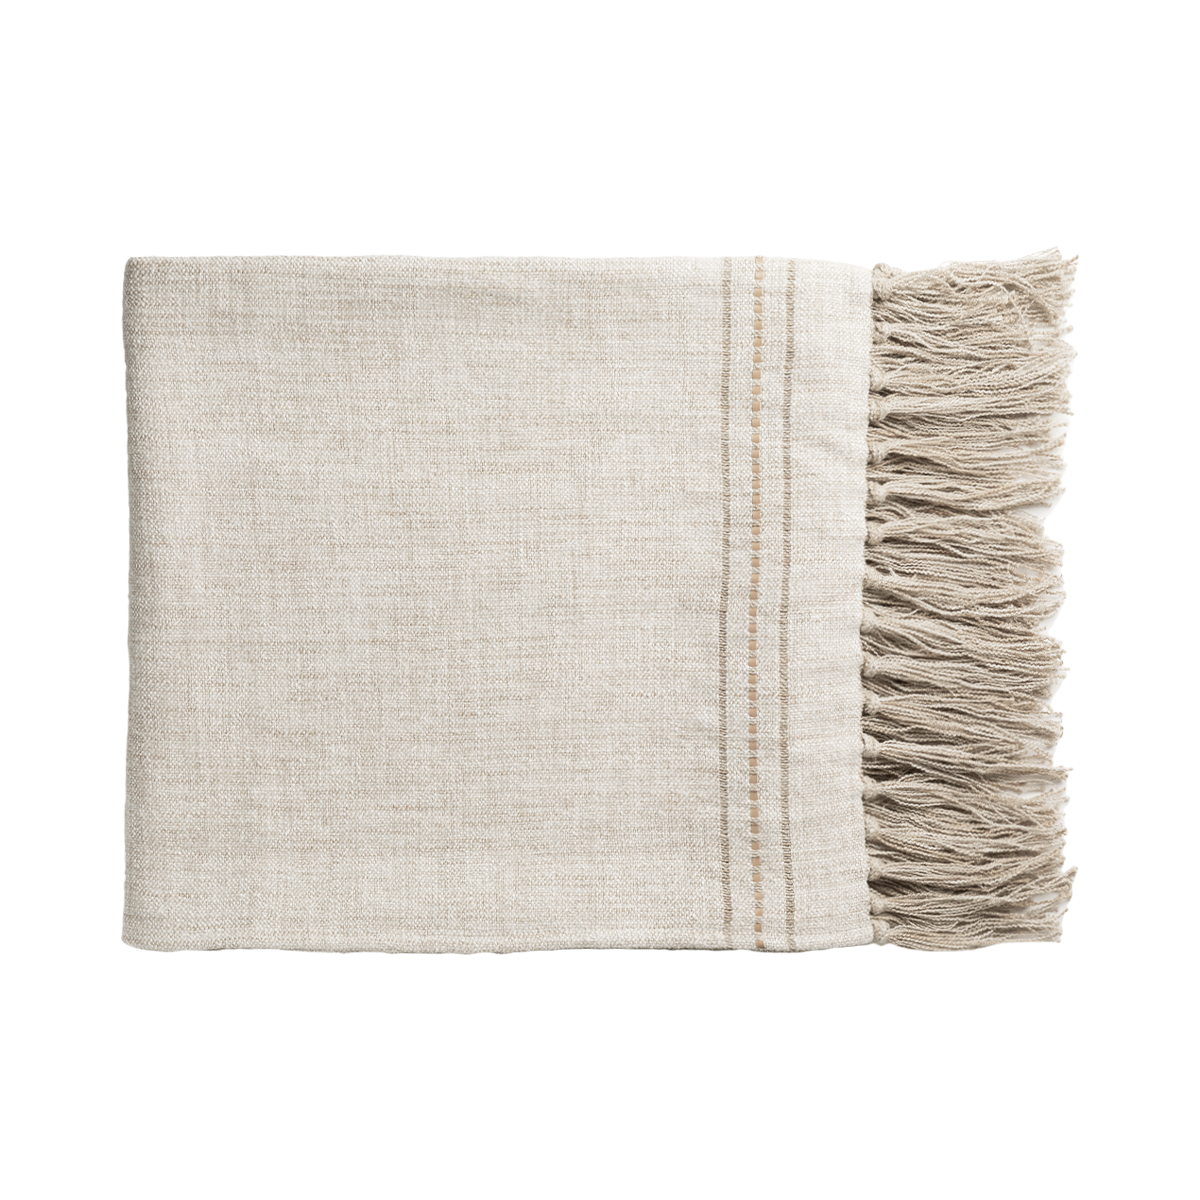 De Le Cuona Hoxton Throw with Fringe and Leather detail